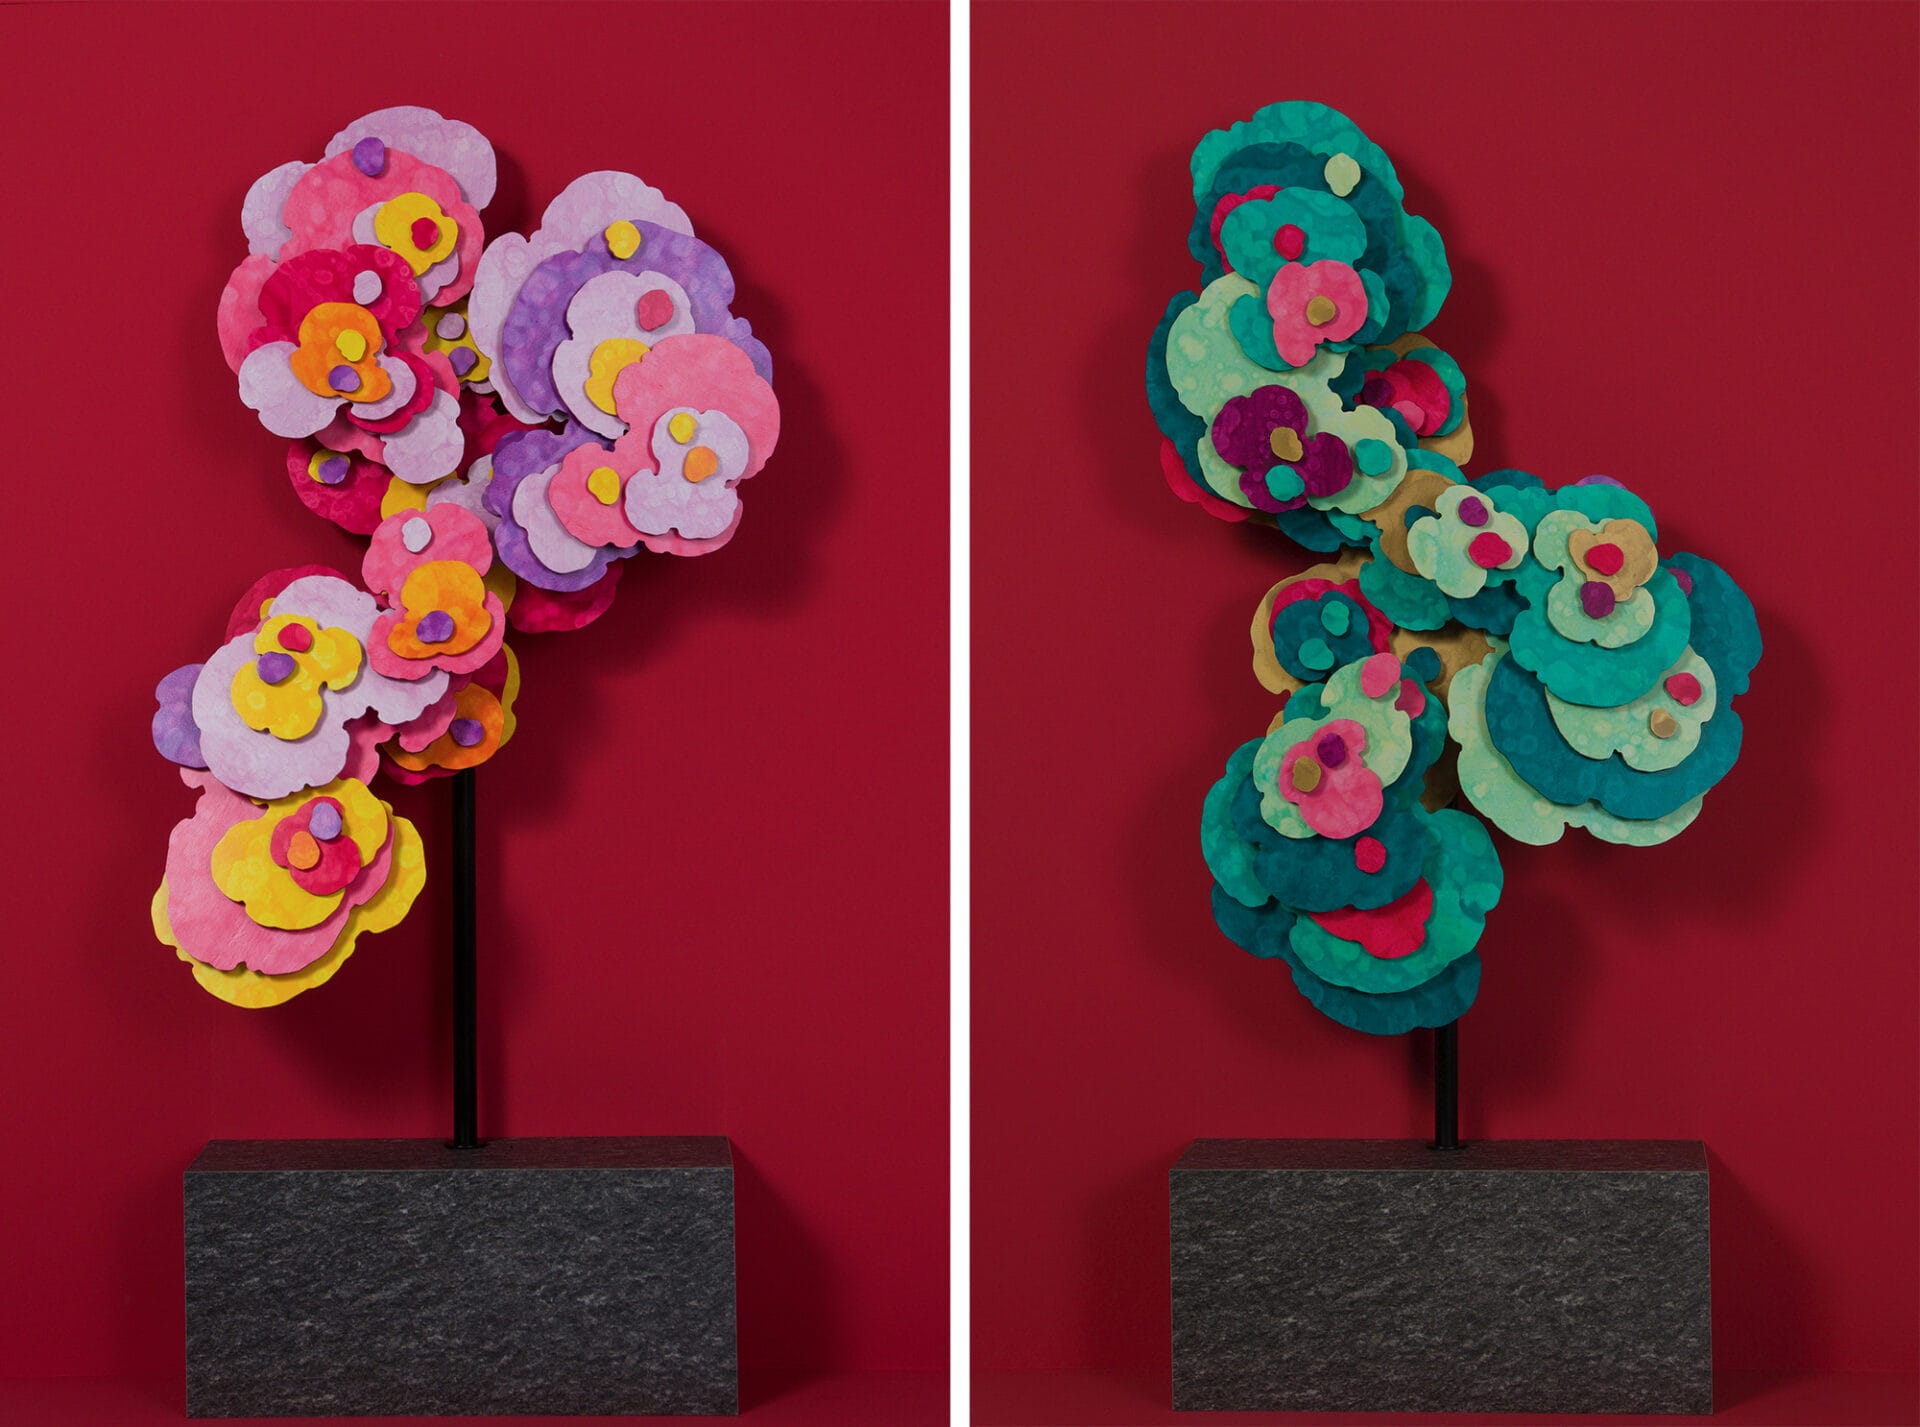 two images side by side, both showing small flower-like abstract sculptures on small pedestals in front of bright red backgrounds